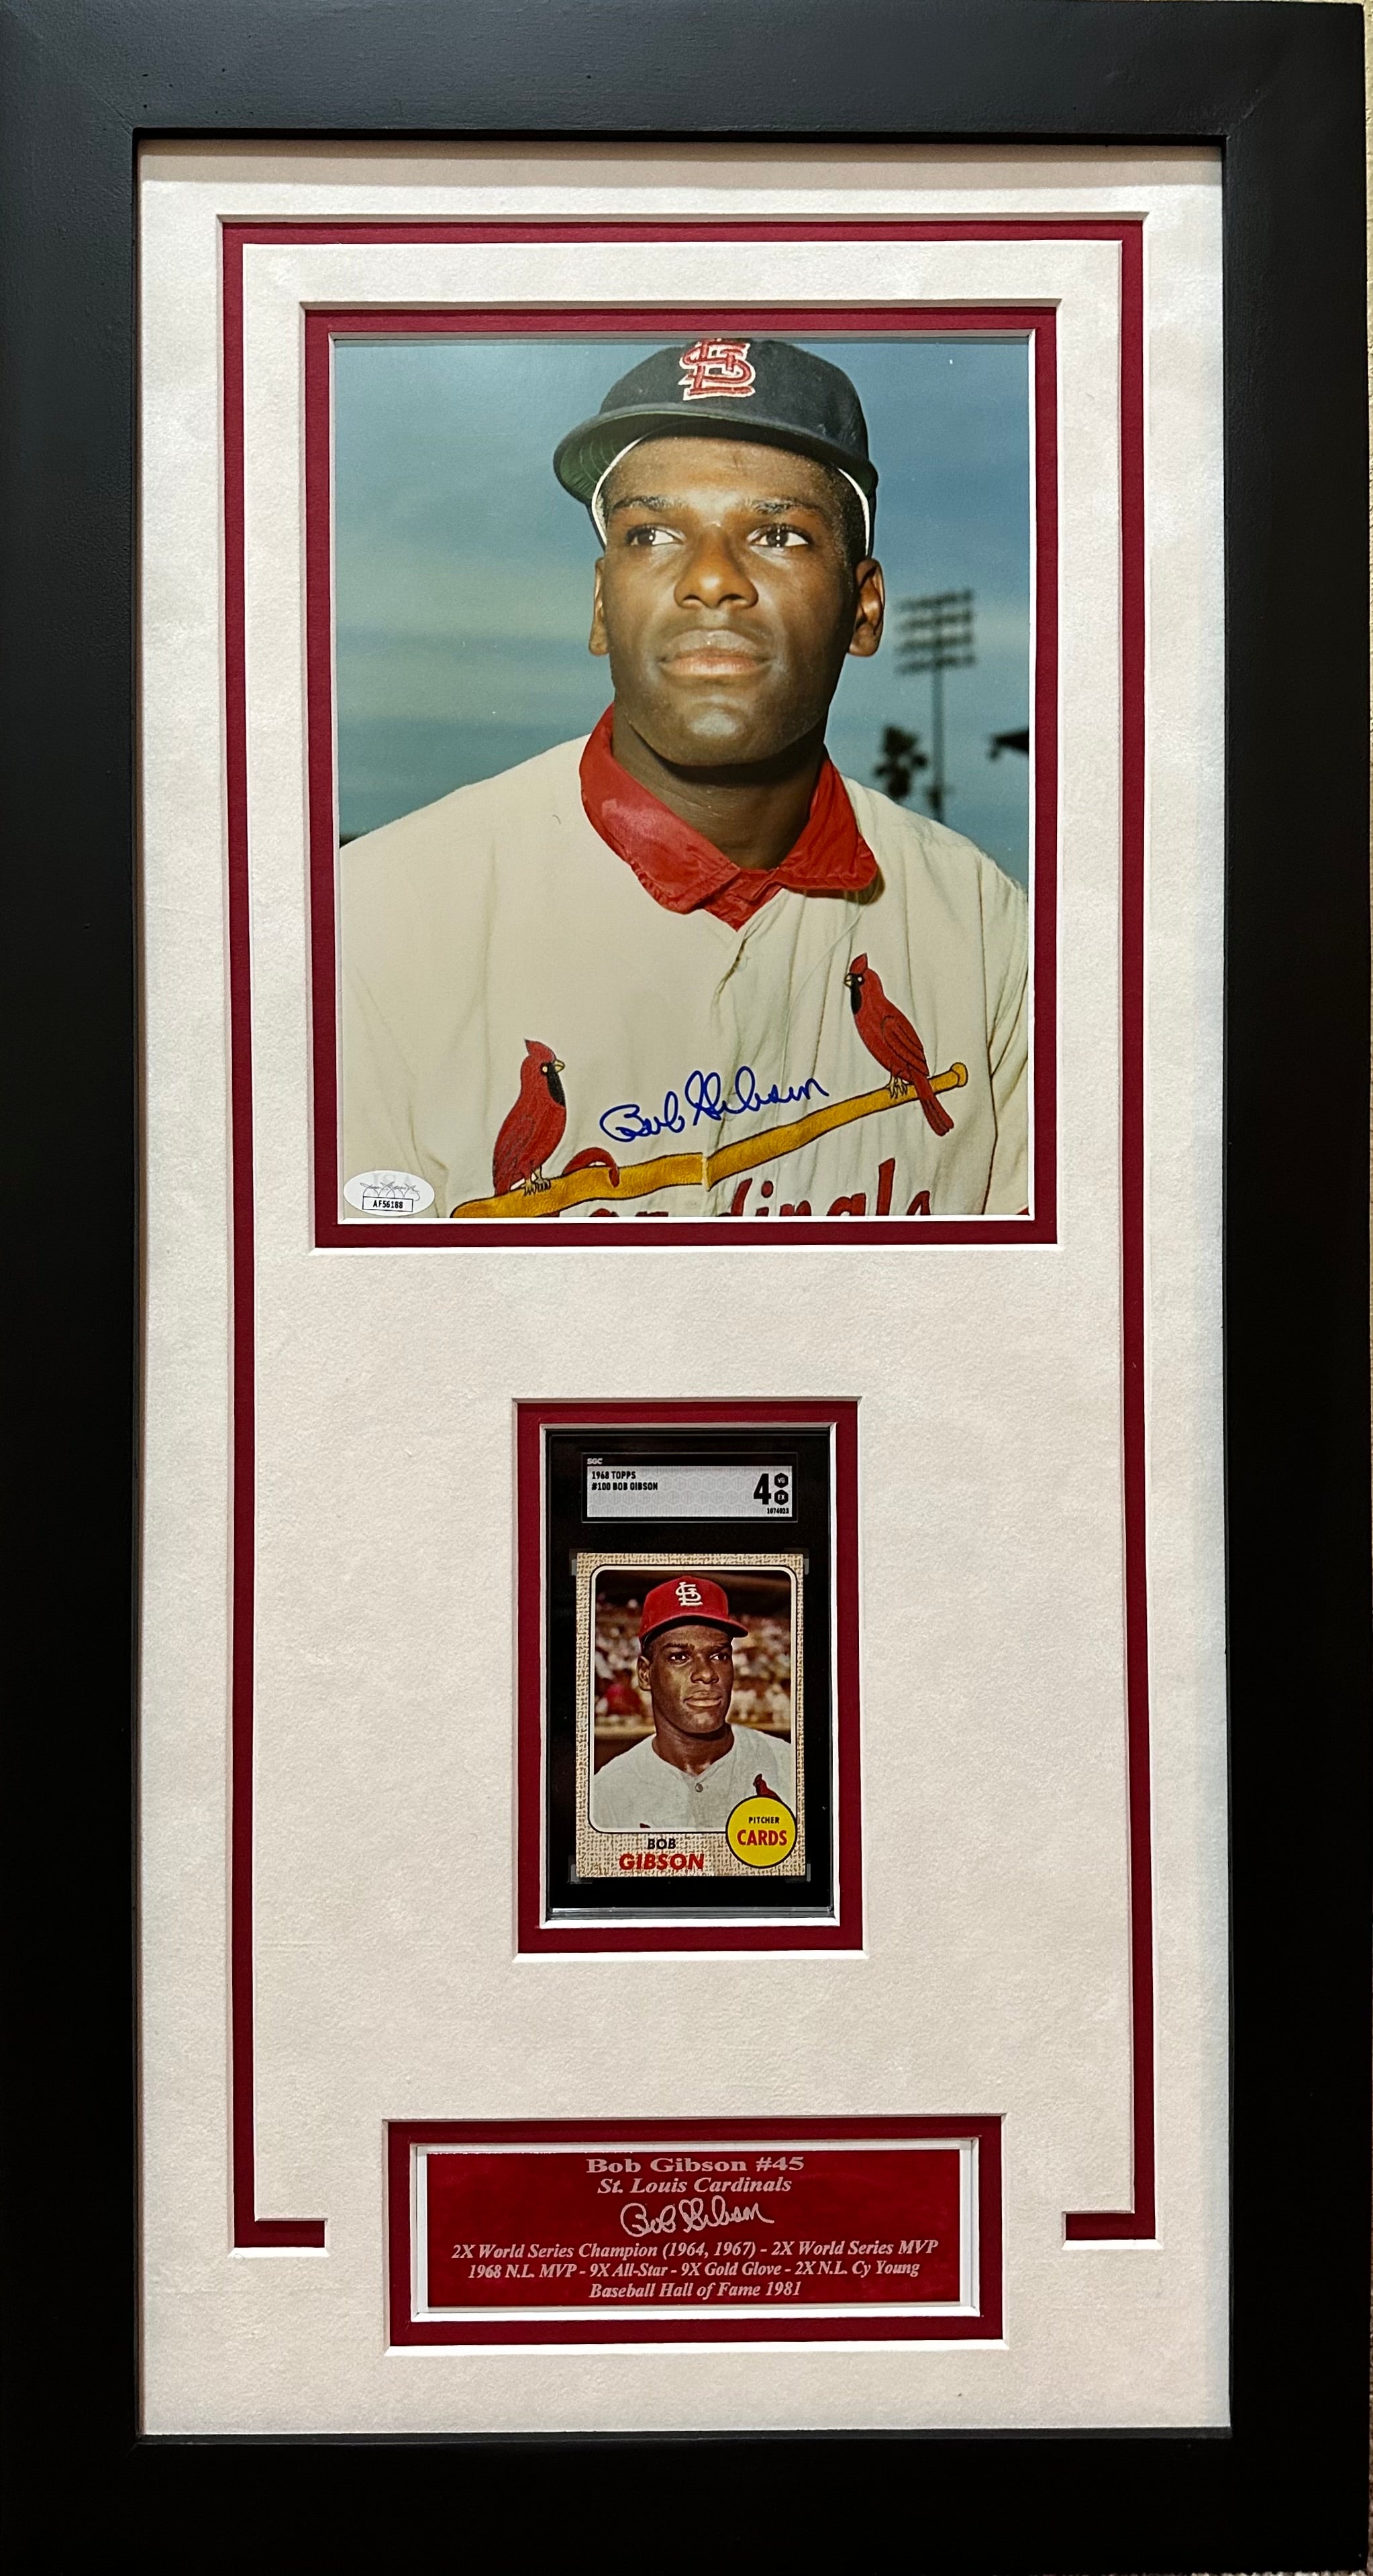 BOB GIBSON AUTOGRAPHED SIGNED 8x10 PHOTO FRAMED W/GRADED CARD JSA CARDINALS